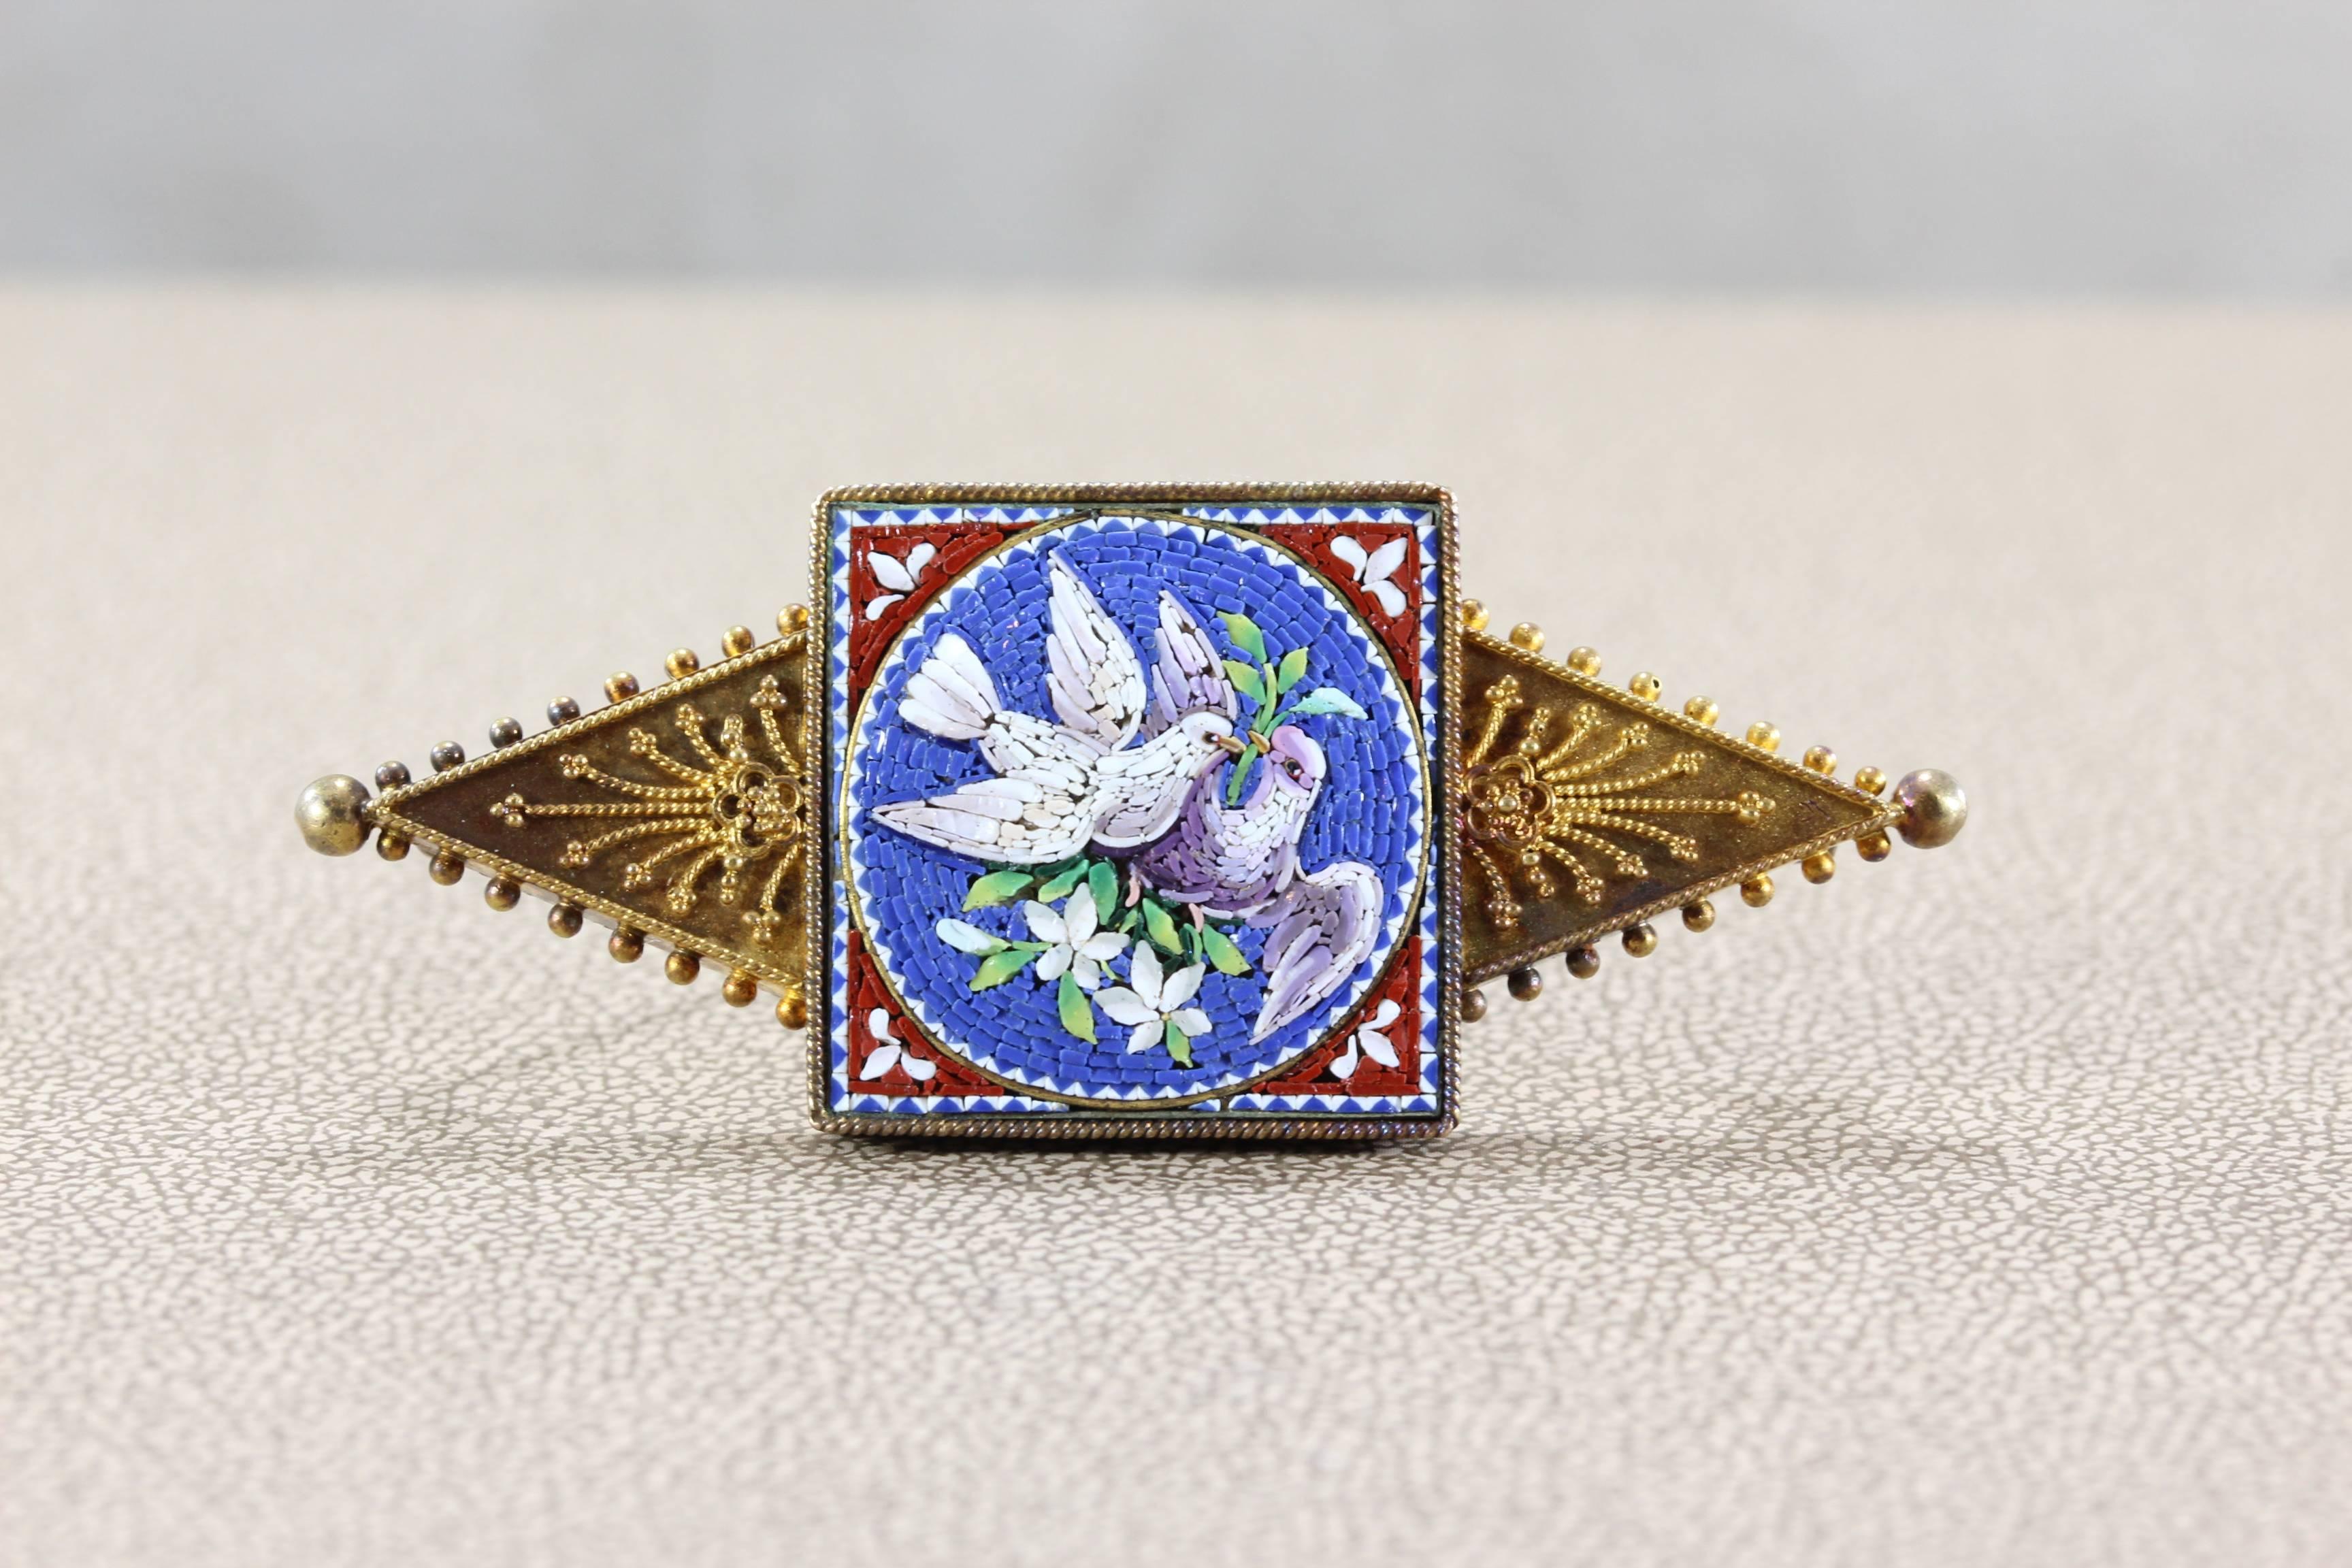 A splendid quality example of micro mosaic work in the Victorian era, most likely crafted in Rome. In fine condition, the mosaic depicts two doves nesting their home with flower branches. The fame is make in 14K gold with scroll motifs and milgrain